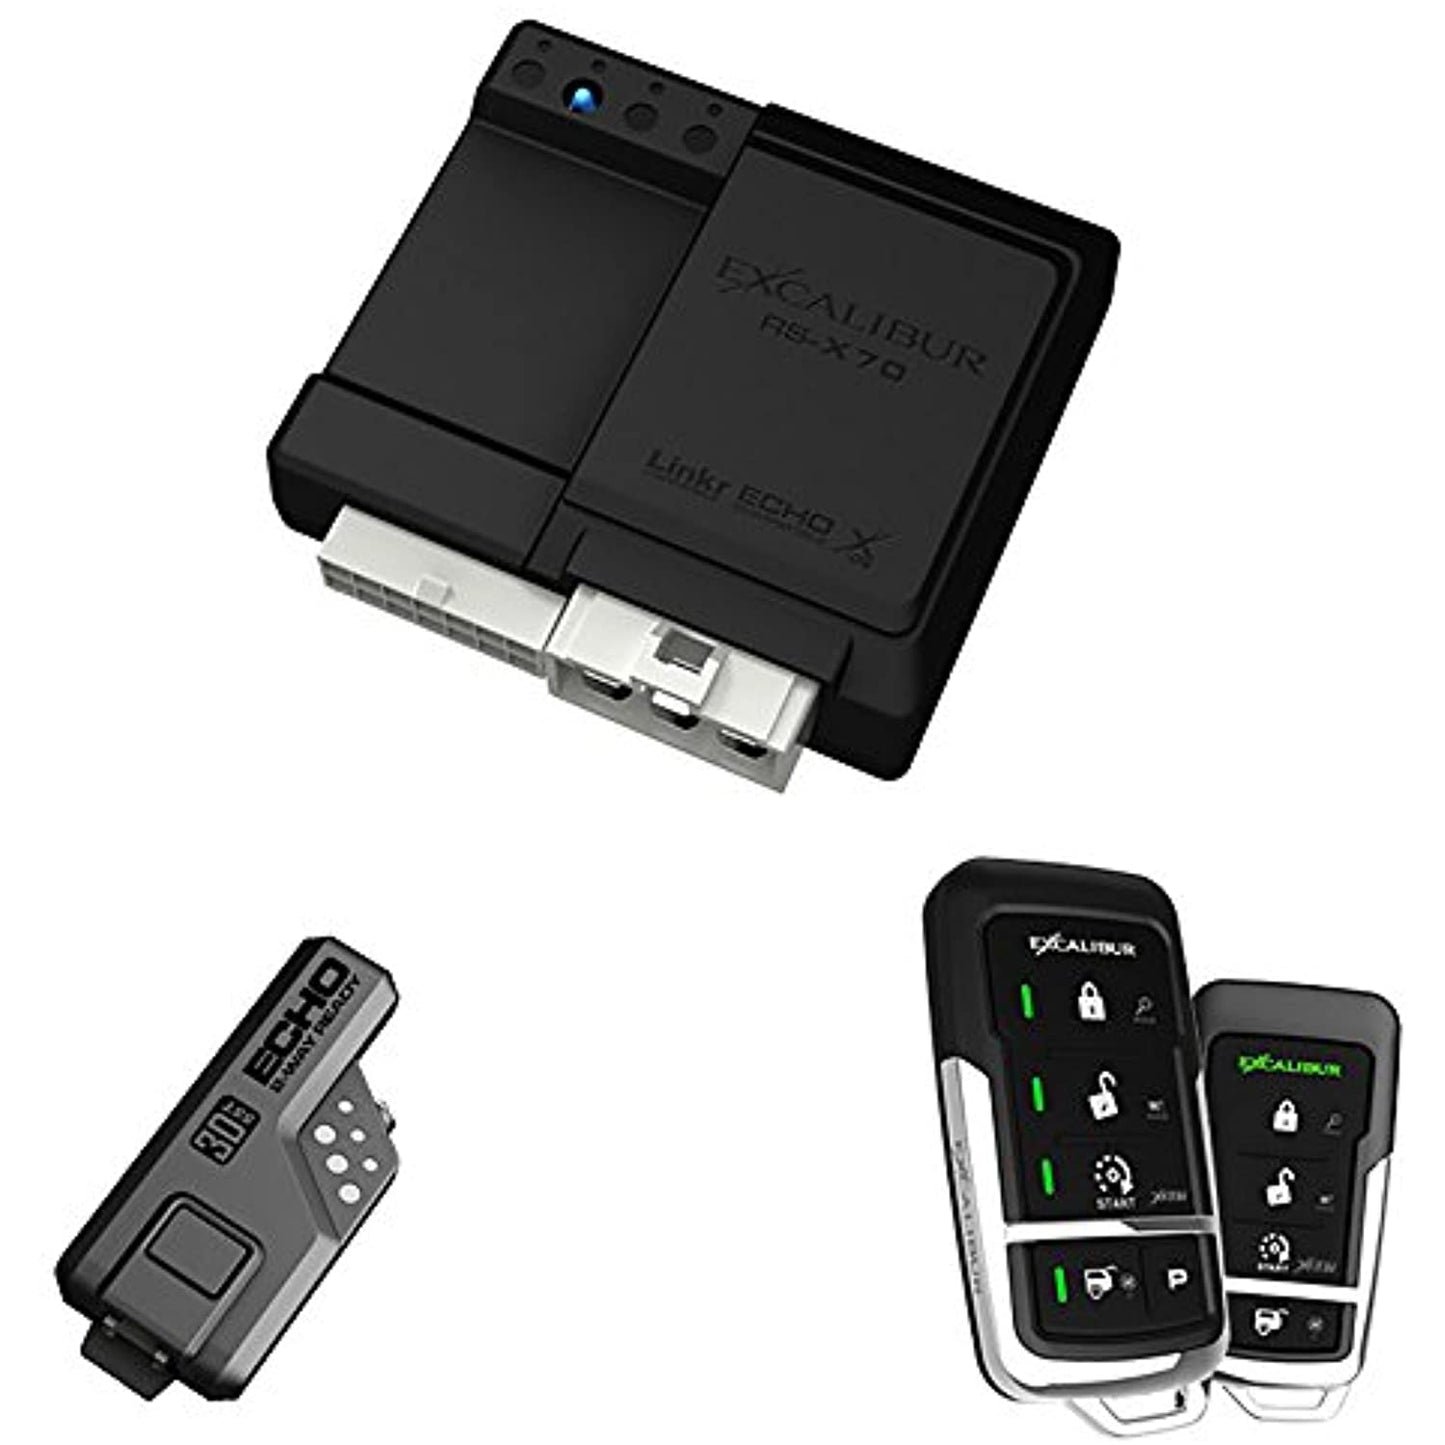 Excalibur RS4753D 2-Way Paging Remote Start/Keyless Entry/Vehicle Security System (with 4 Button Remote and Sidekick Remote), 1 Pack